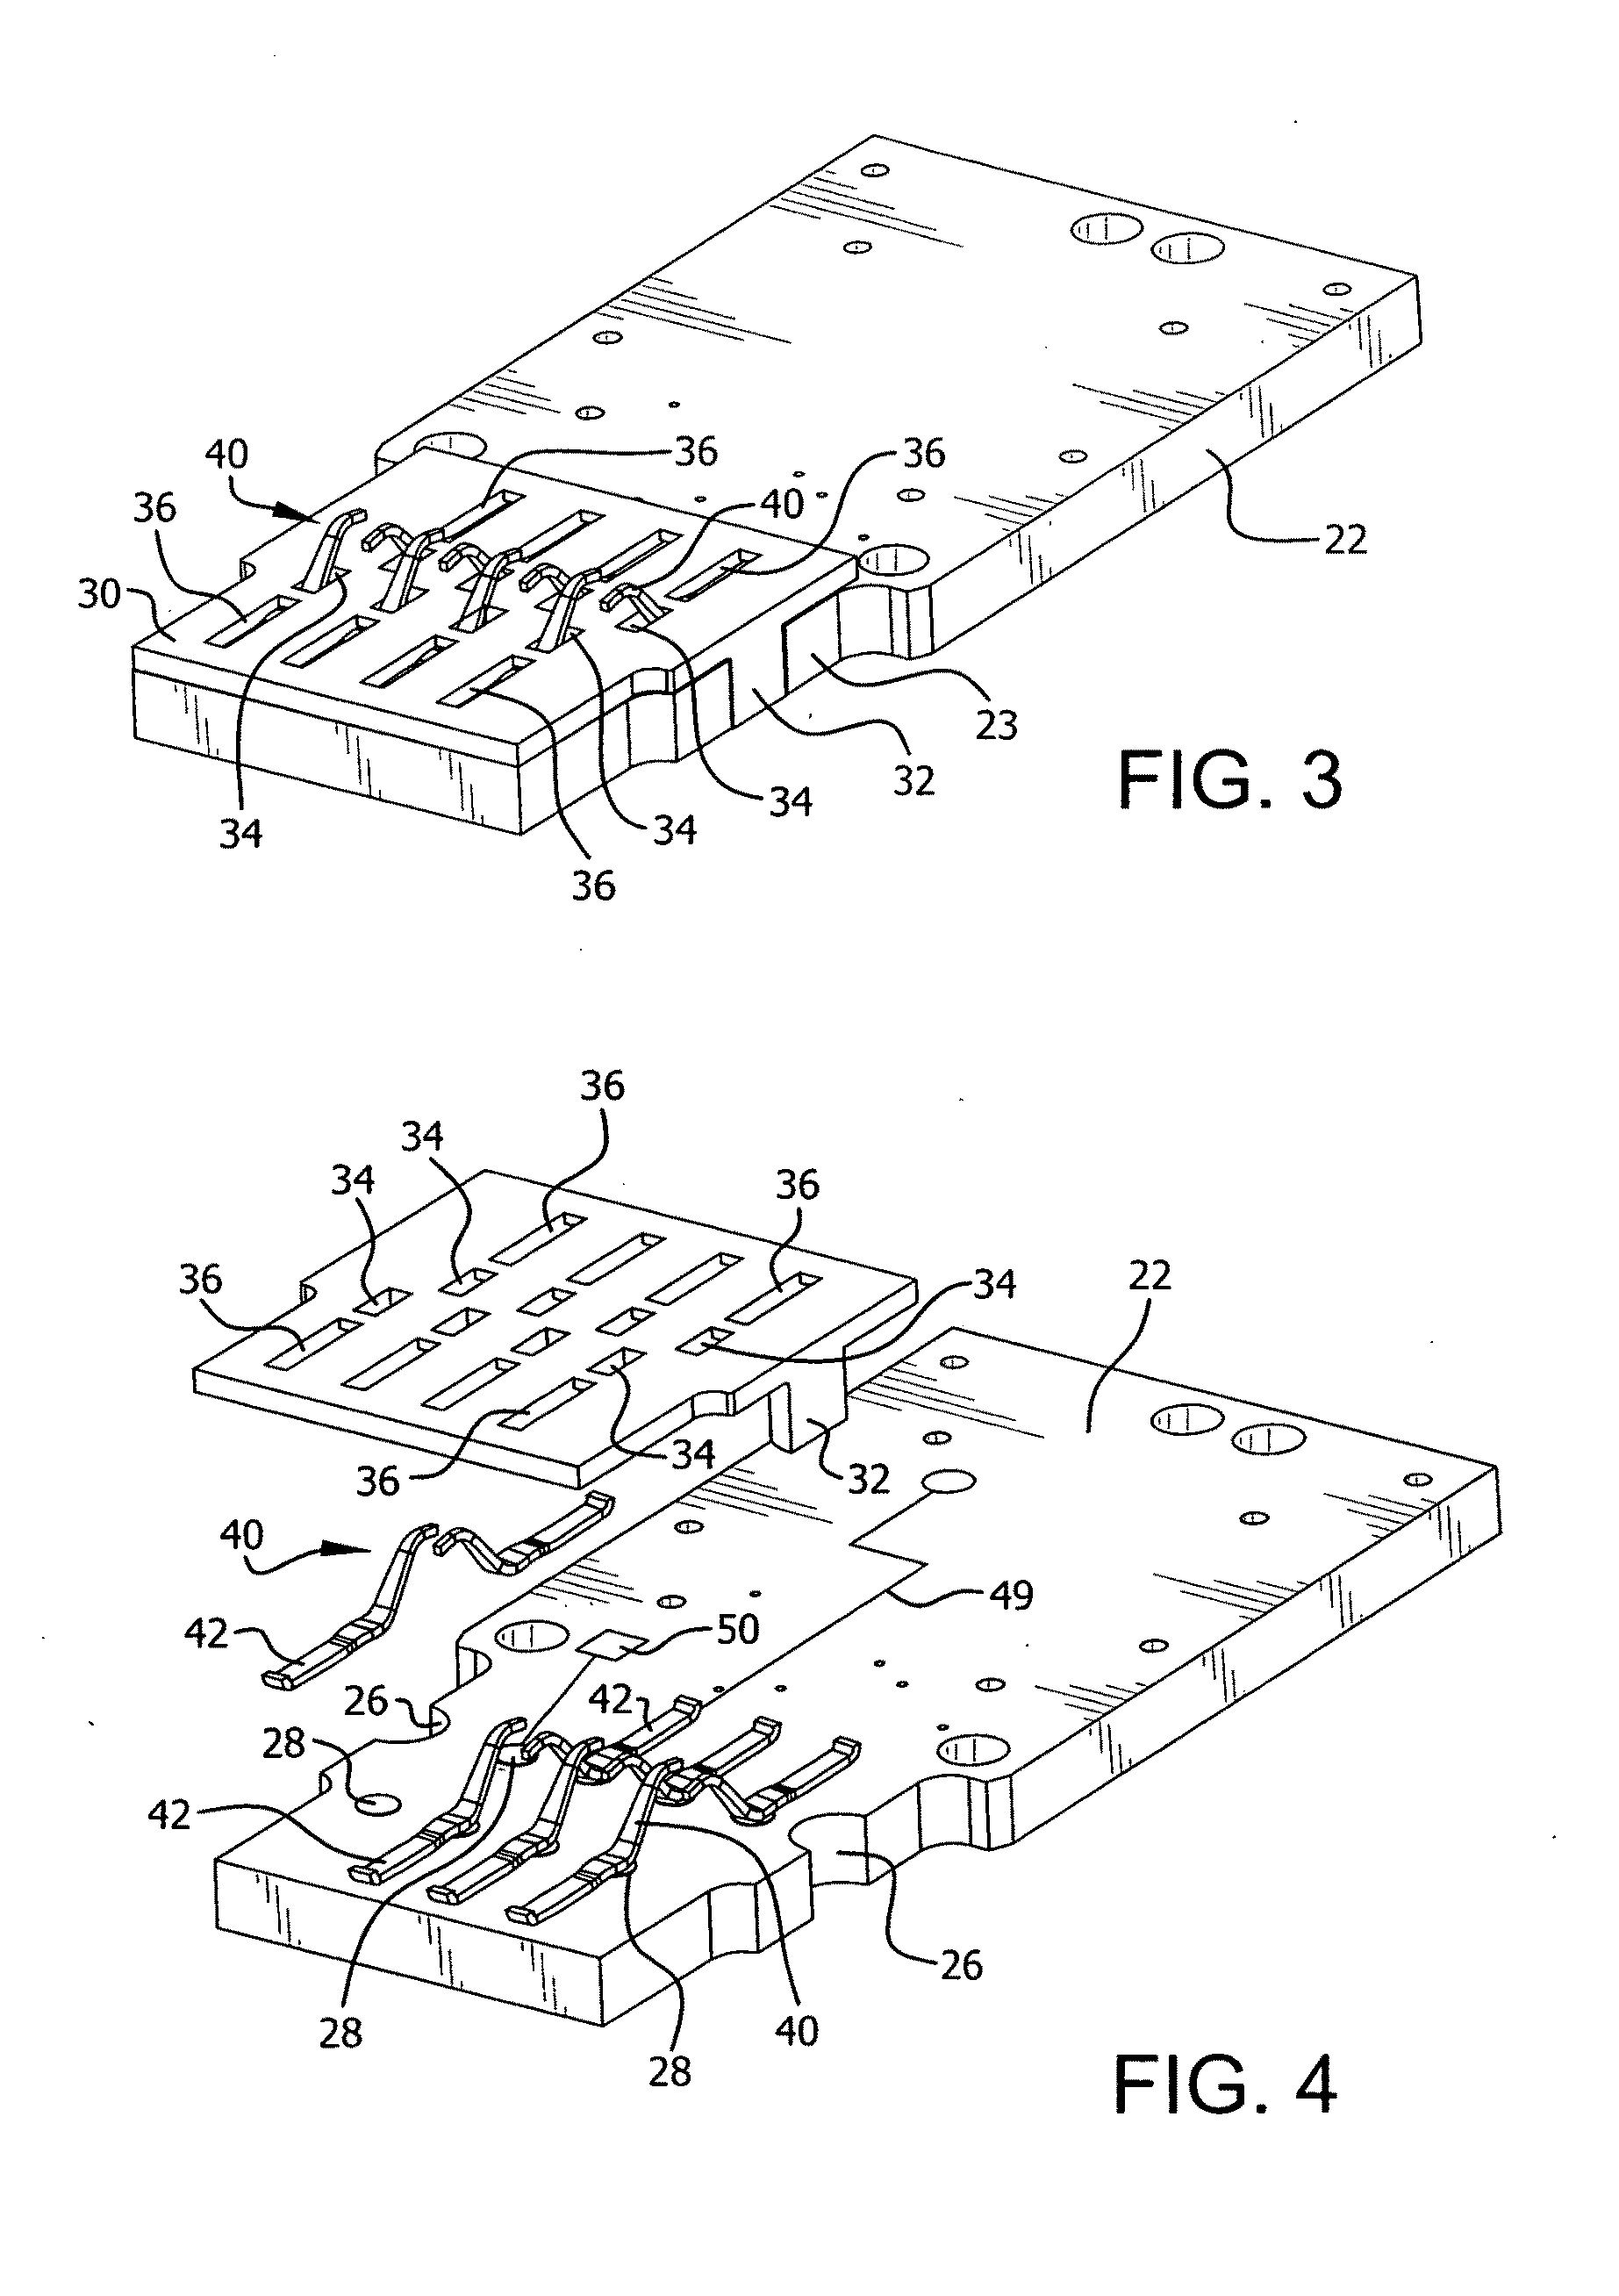 Electrical connector with low-stress, reduced-electrical-length contacts